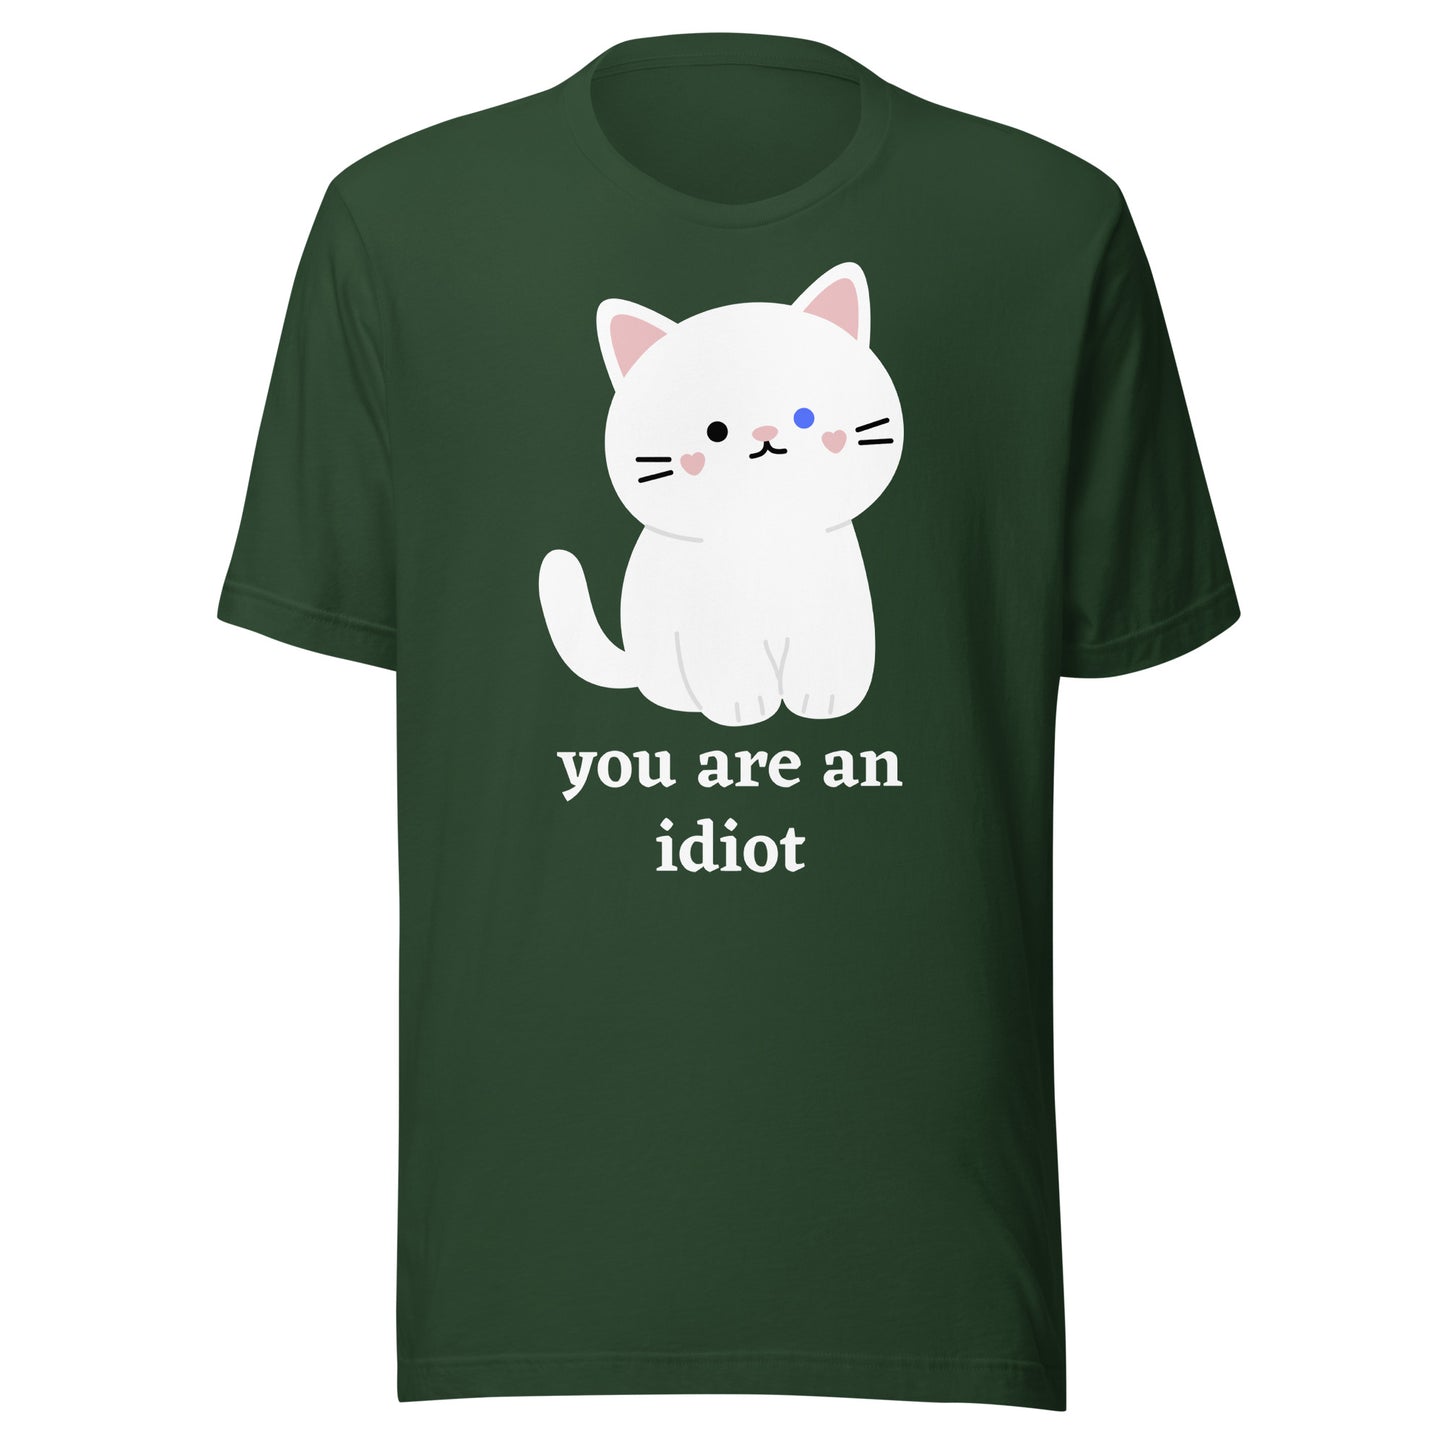 "You are an idiot" Cat - Unisex t-shirt